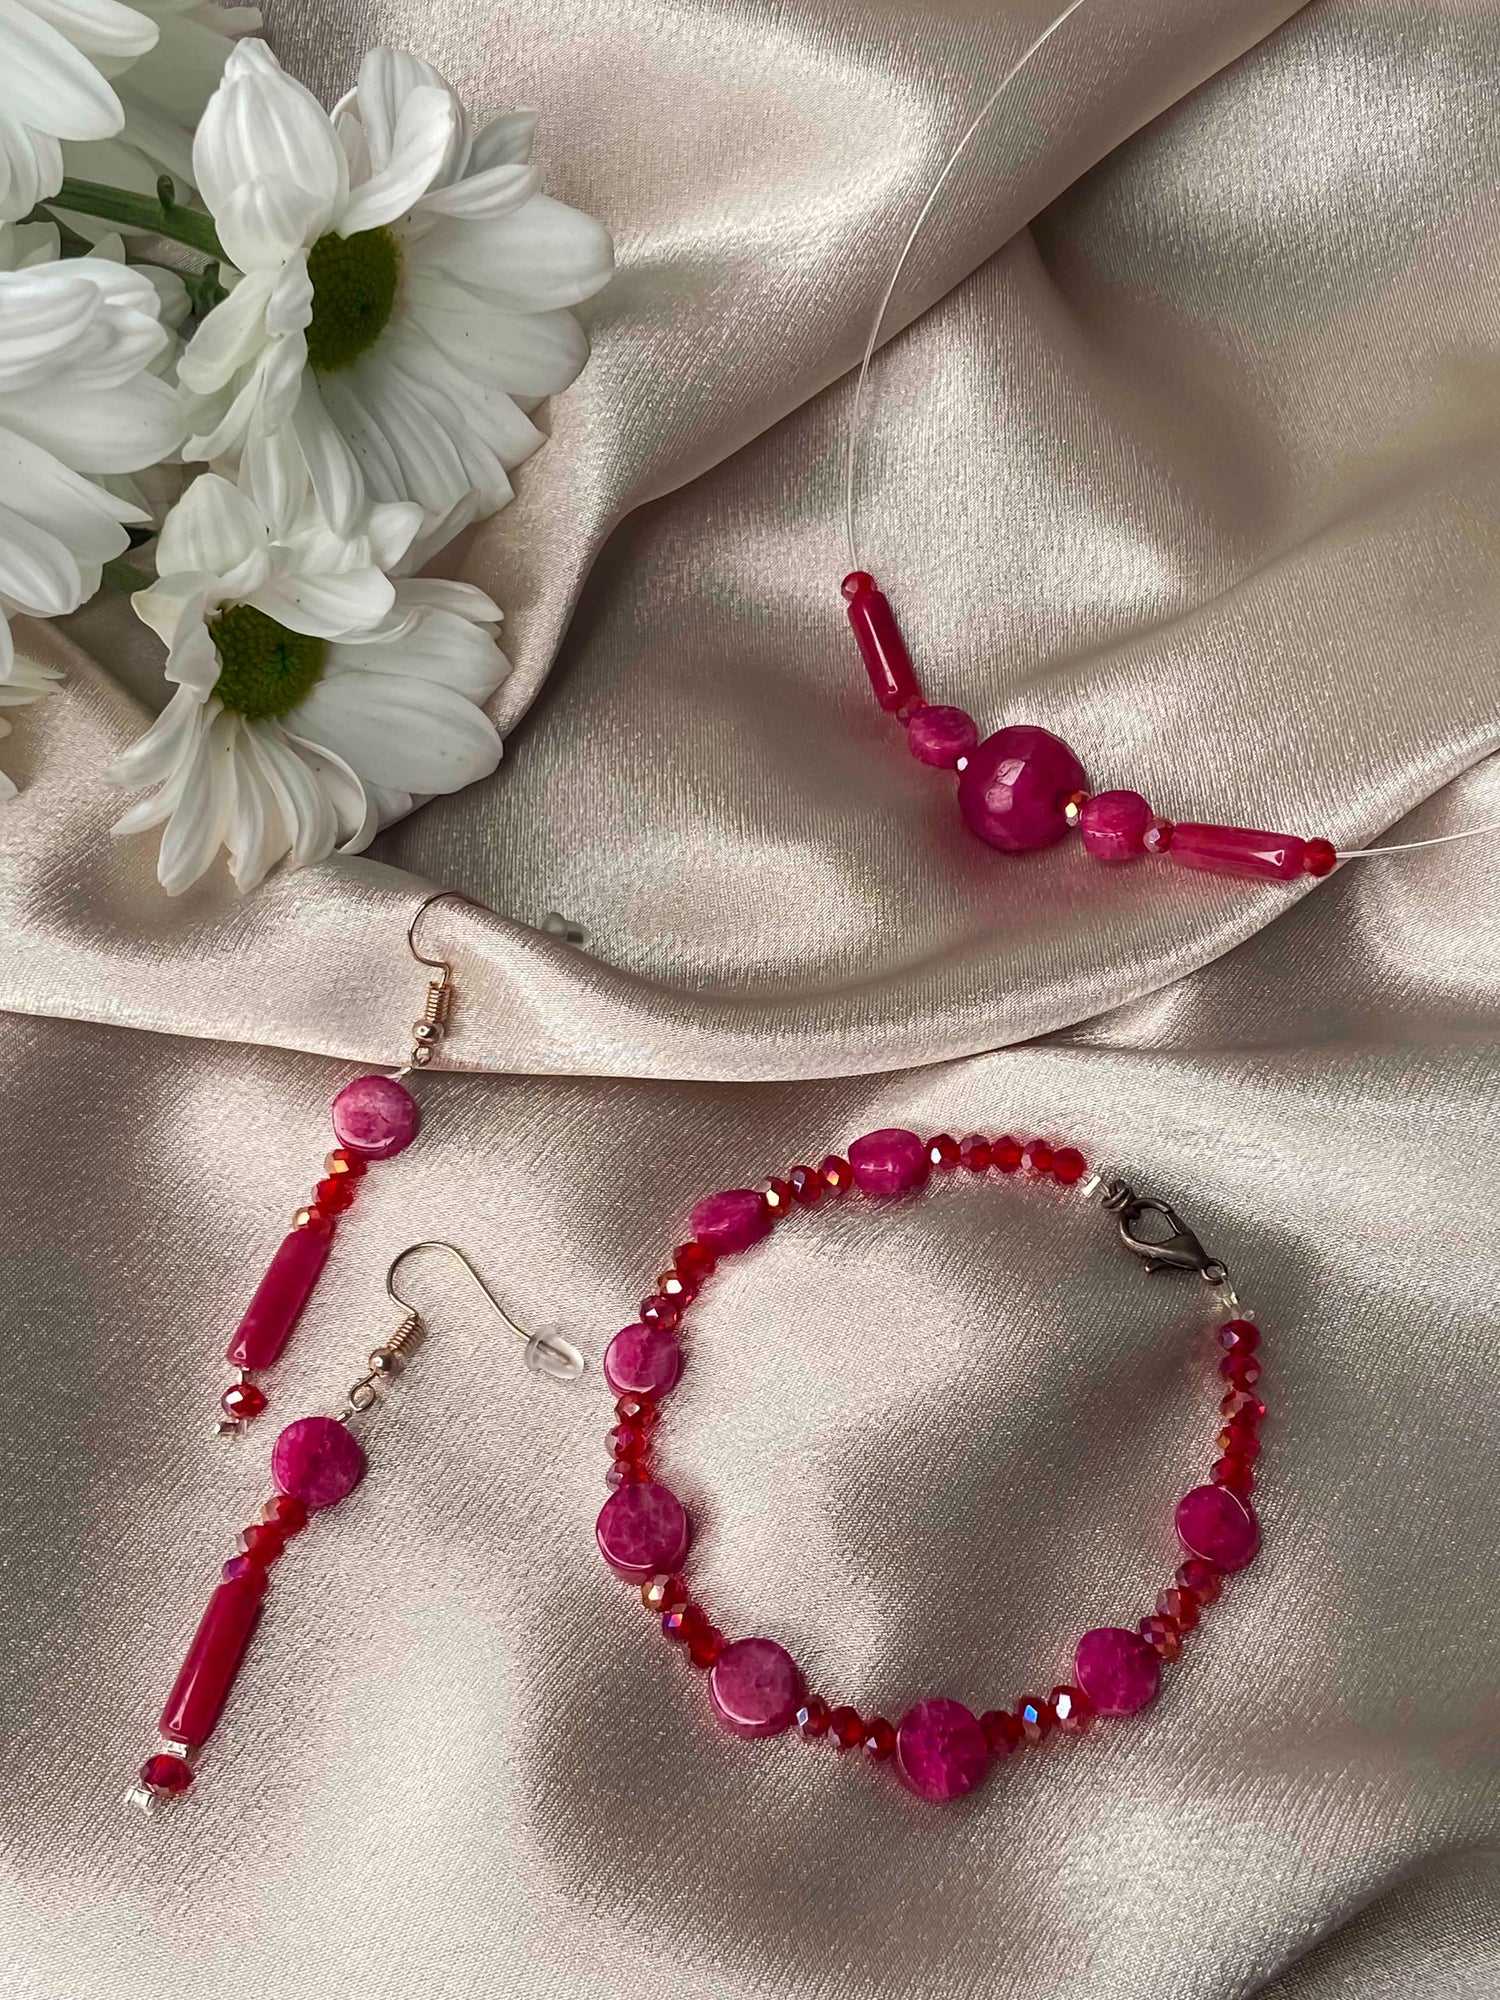 Handmade red crystal and pink rubellite stone dangle drop earrings, bracelet, and pendant necklace.